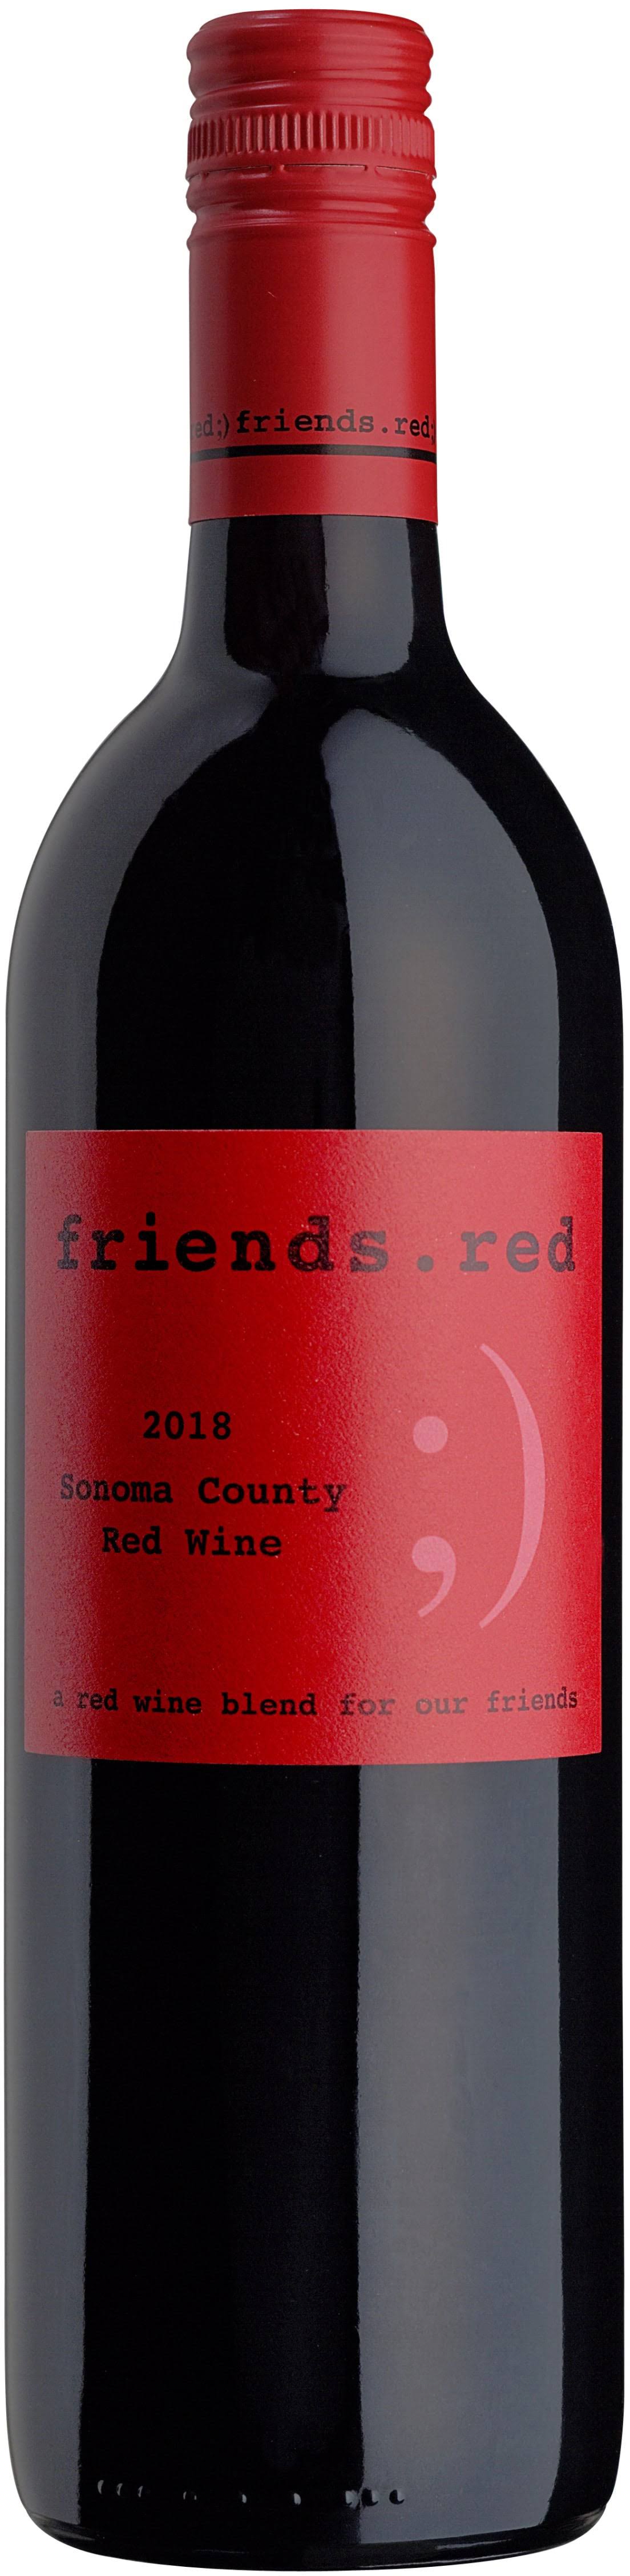 Friends Red Red Wine, Sonoma County